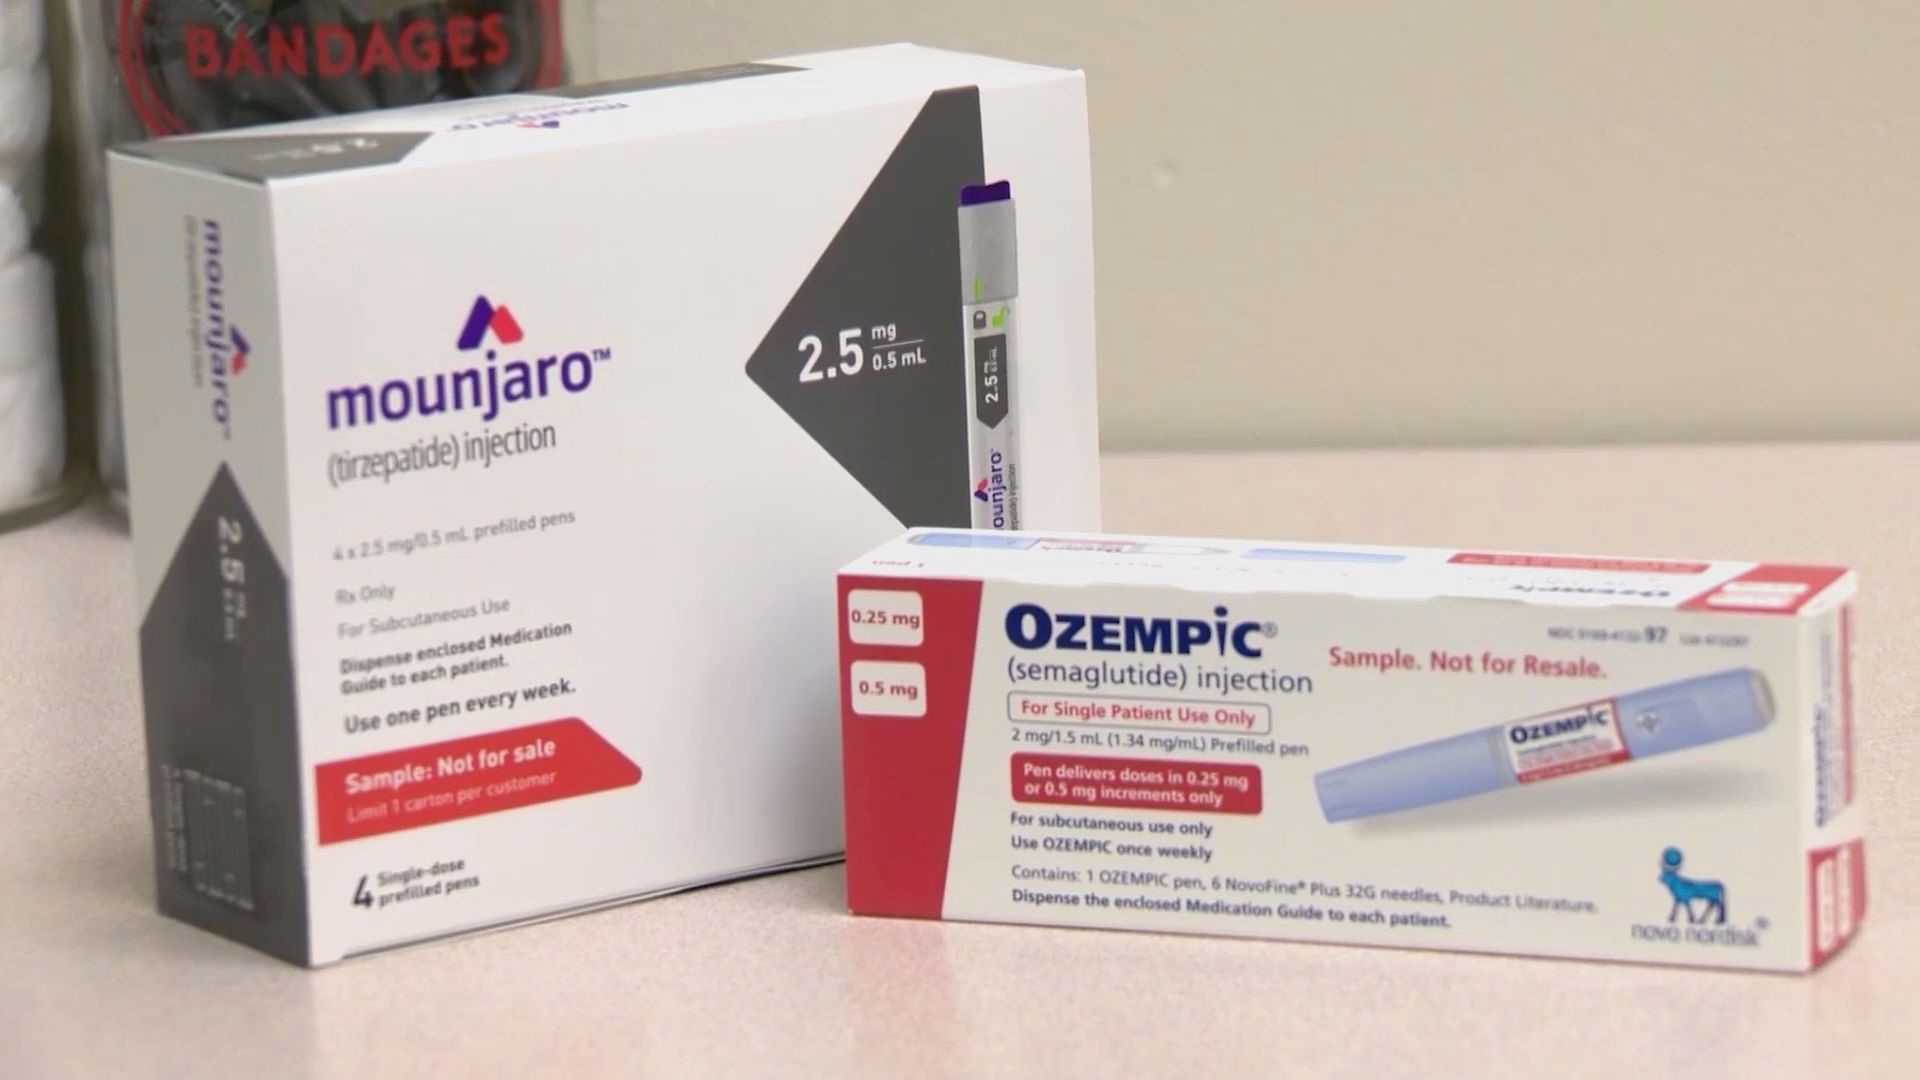 The FDA is warning consumers not to use off-brand versions of the popular weight-loss drugs Ozempic and Wegovy.